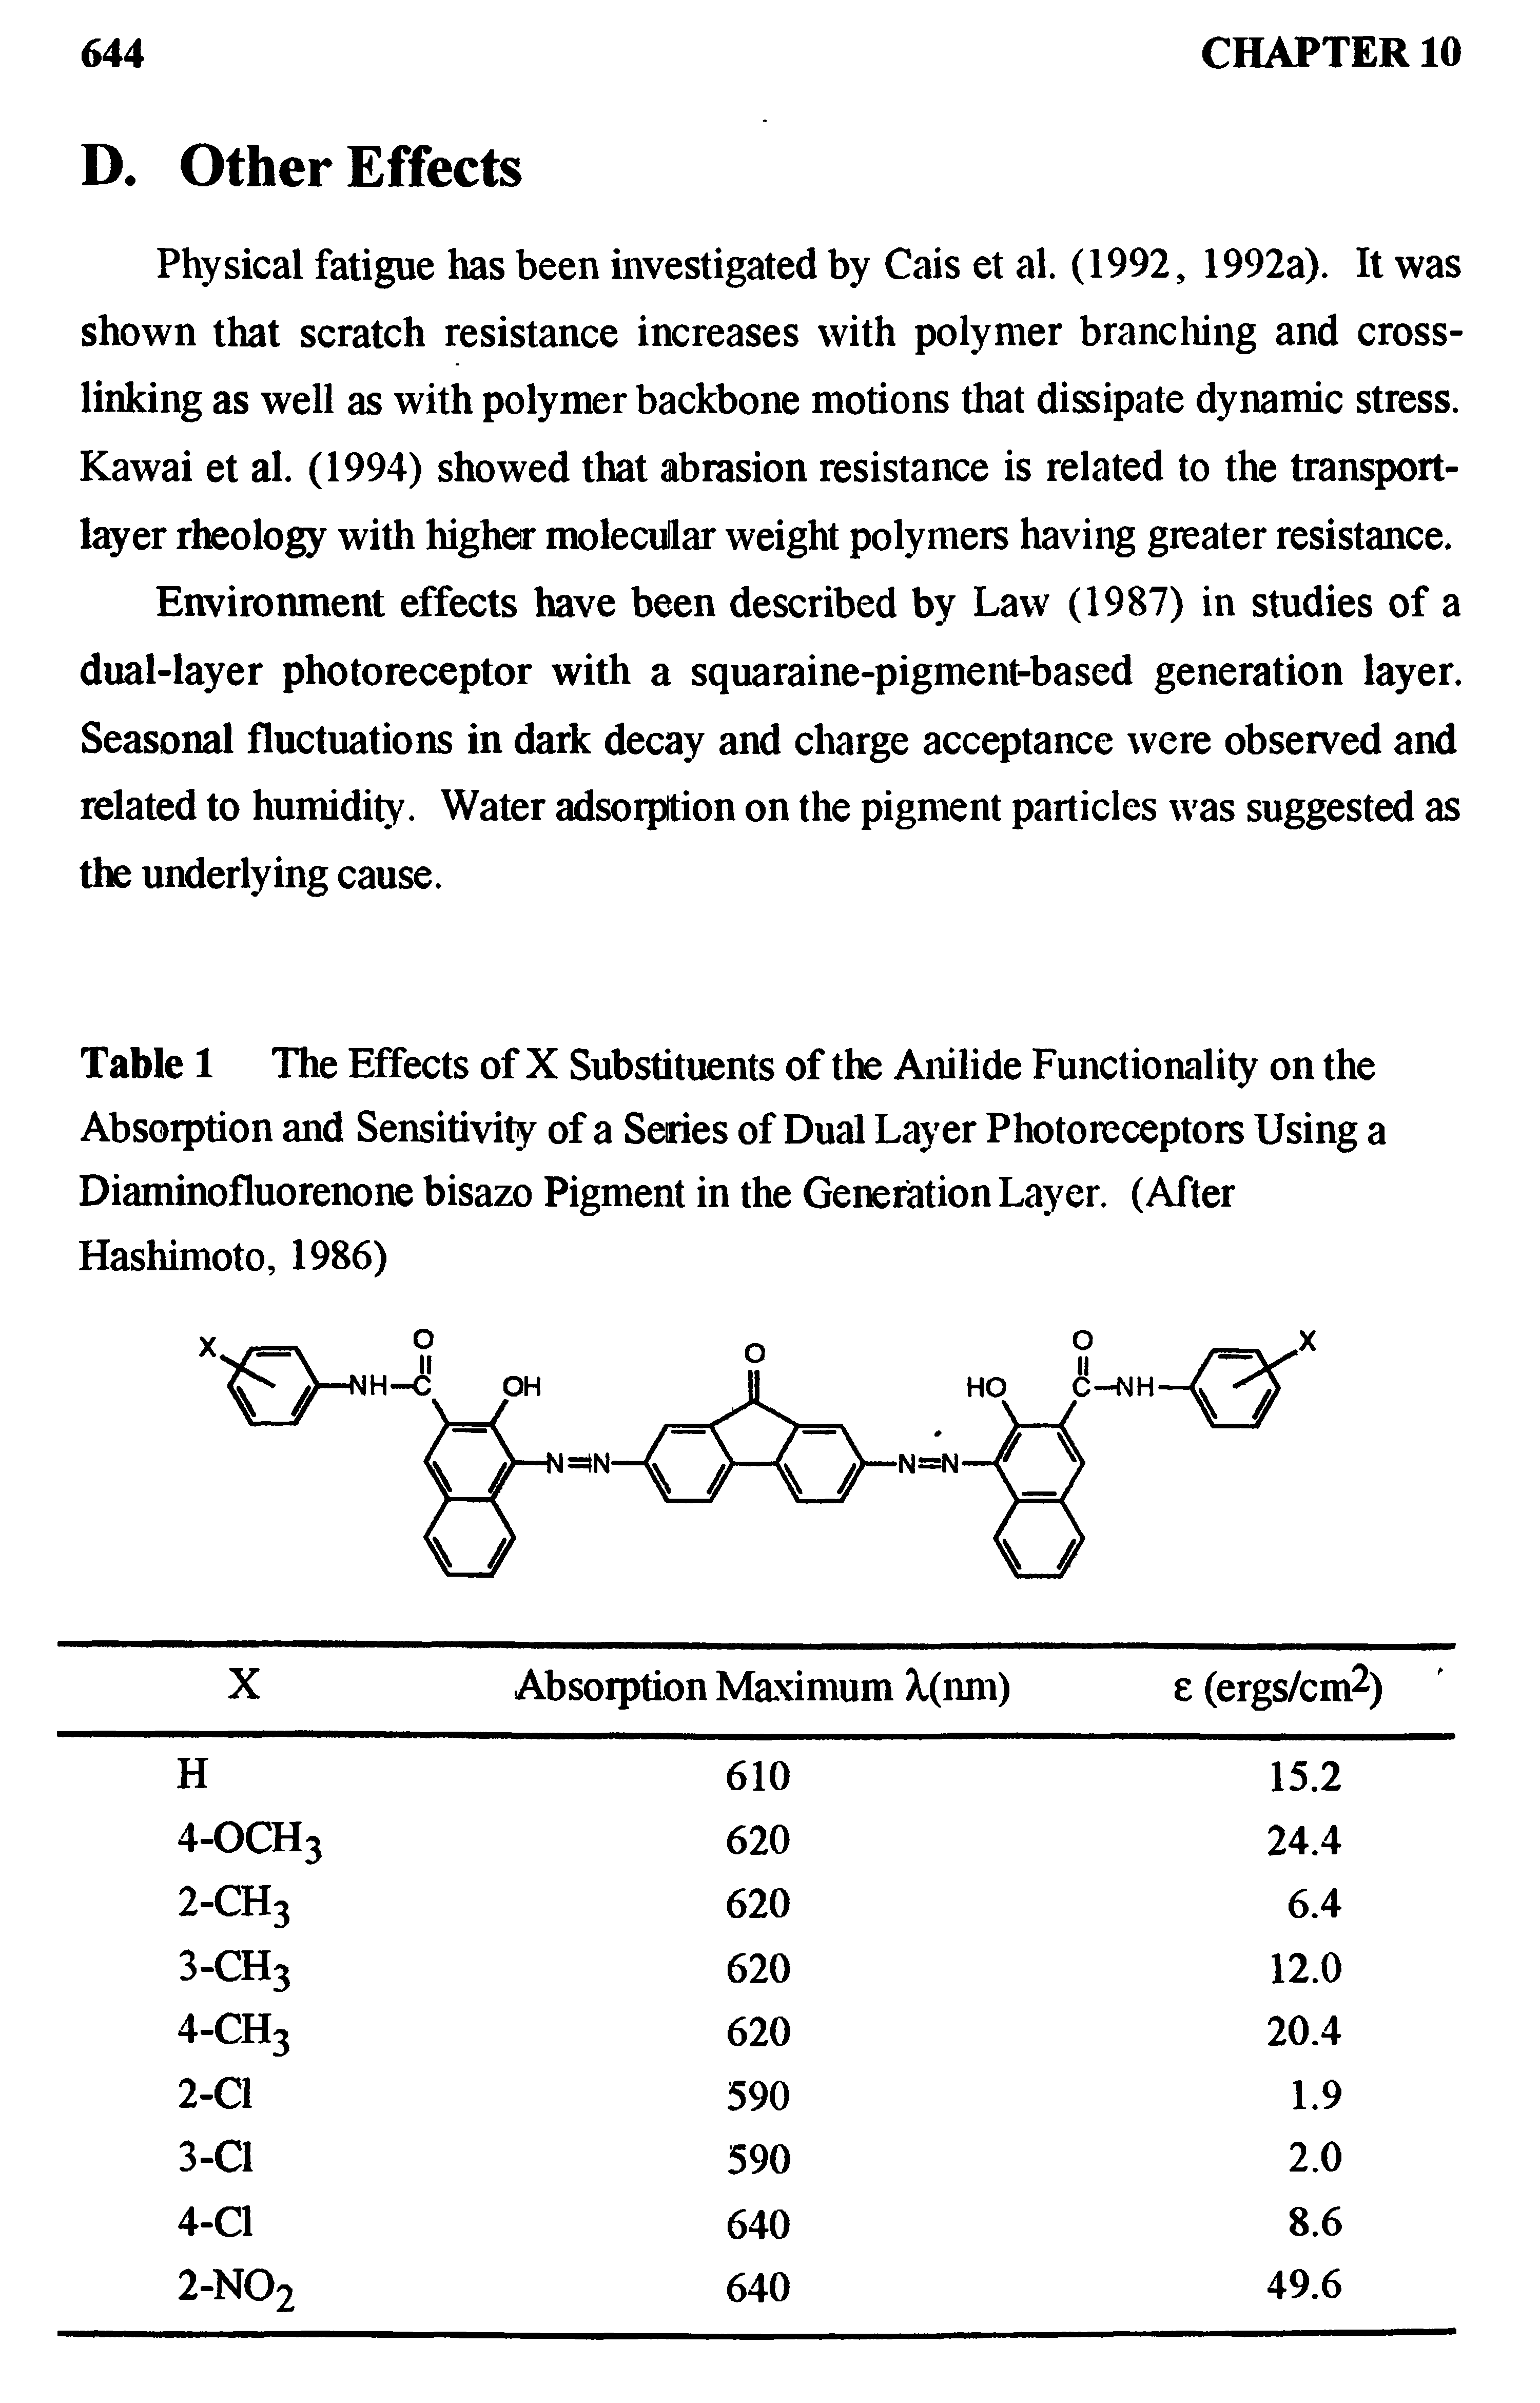 Table 1 The Effects of X Substituents of the Anilide Functionality on the Absorption and Sensitivity of a Series of Dual Layer Photoreceptors Using a Diaminofluorenone bisazo Pigment in the Generation Layer. (After Hashimoto, 1986)...